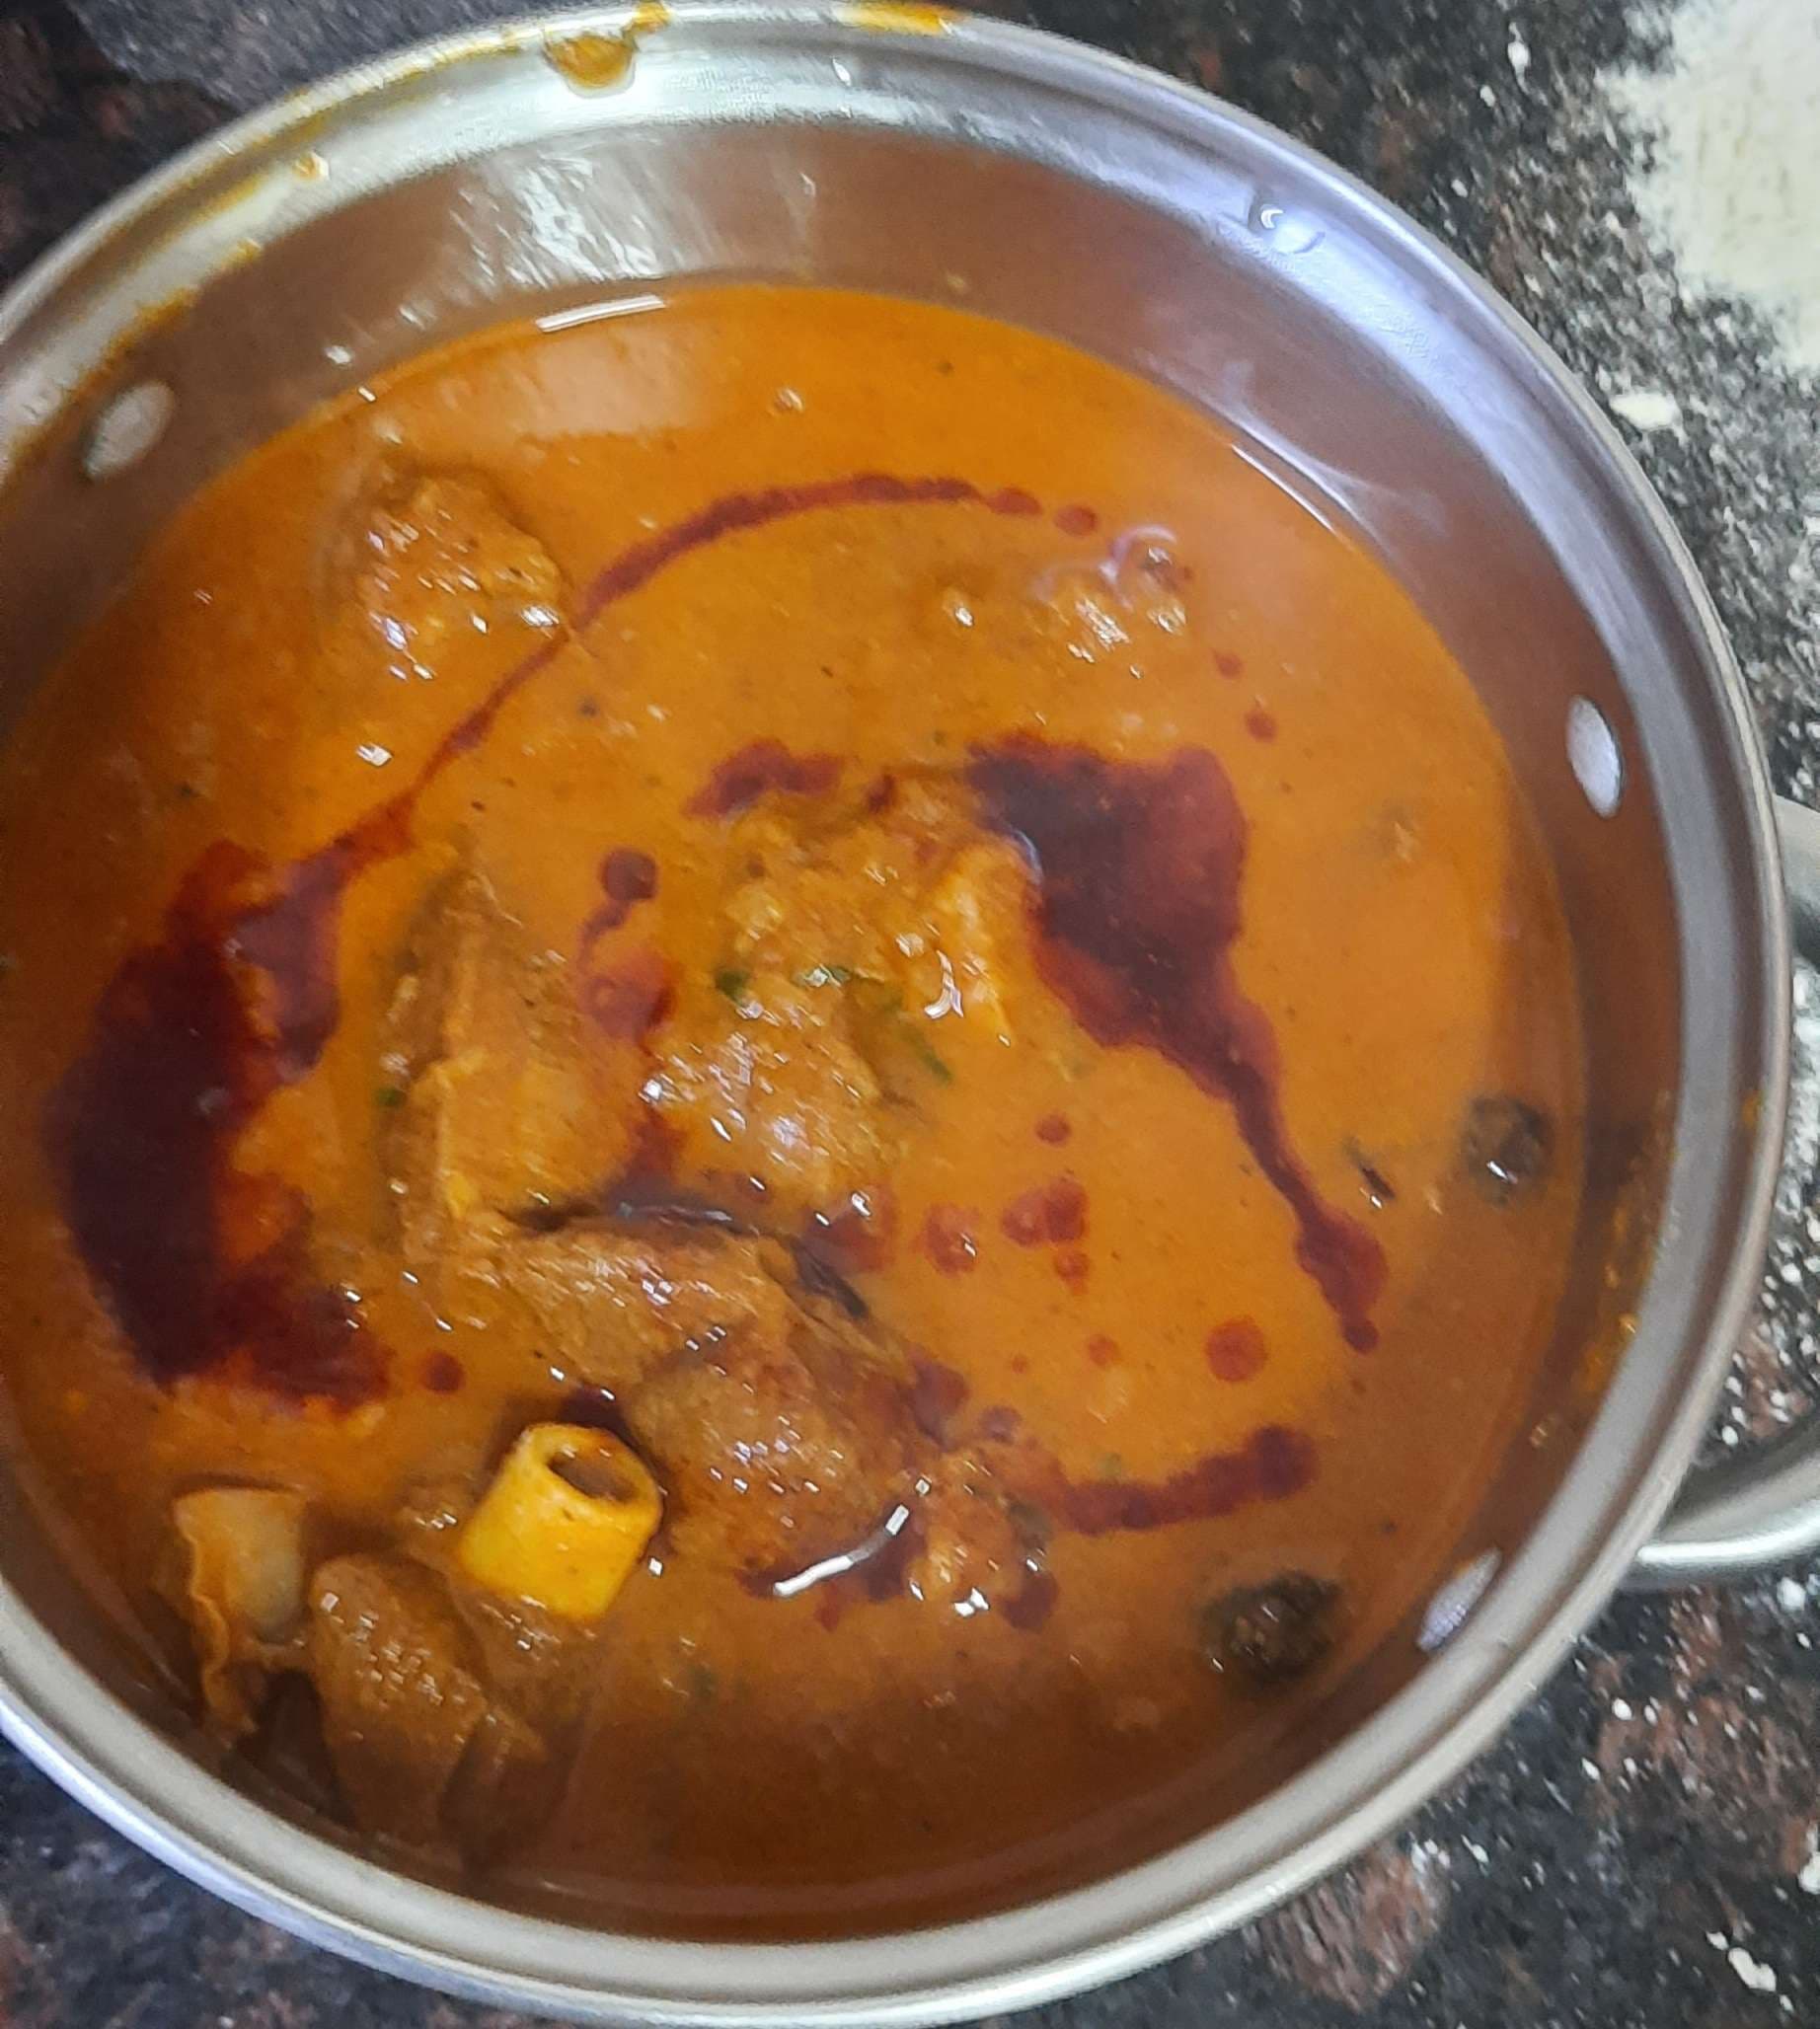 Delicious Mutton Curry prepared by COOX